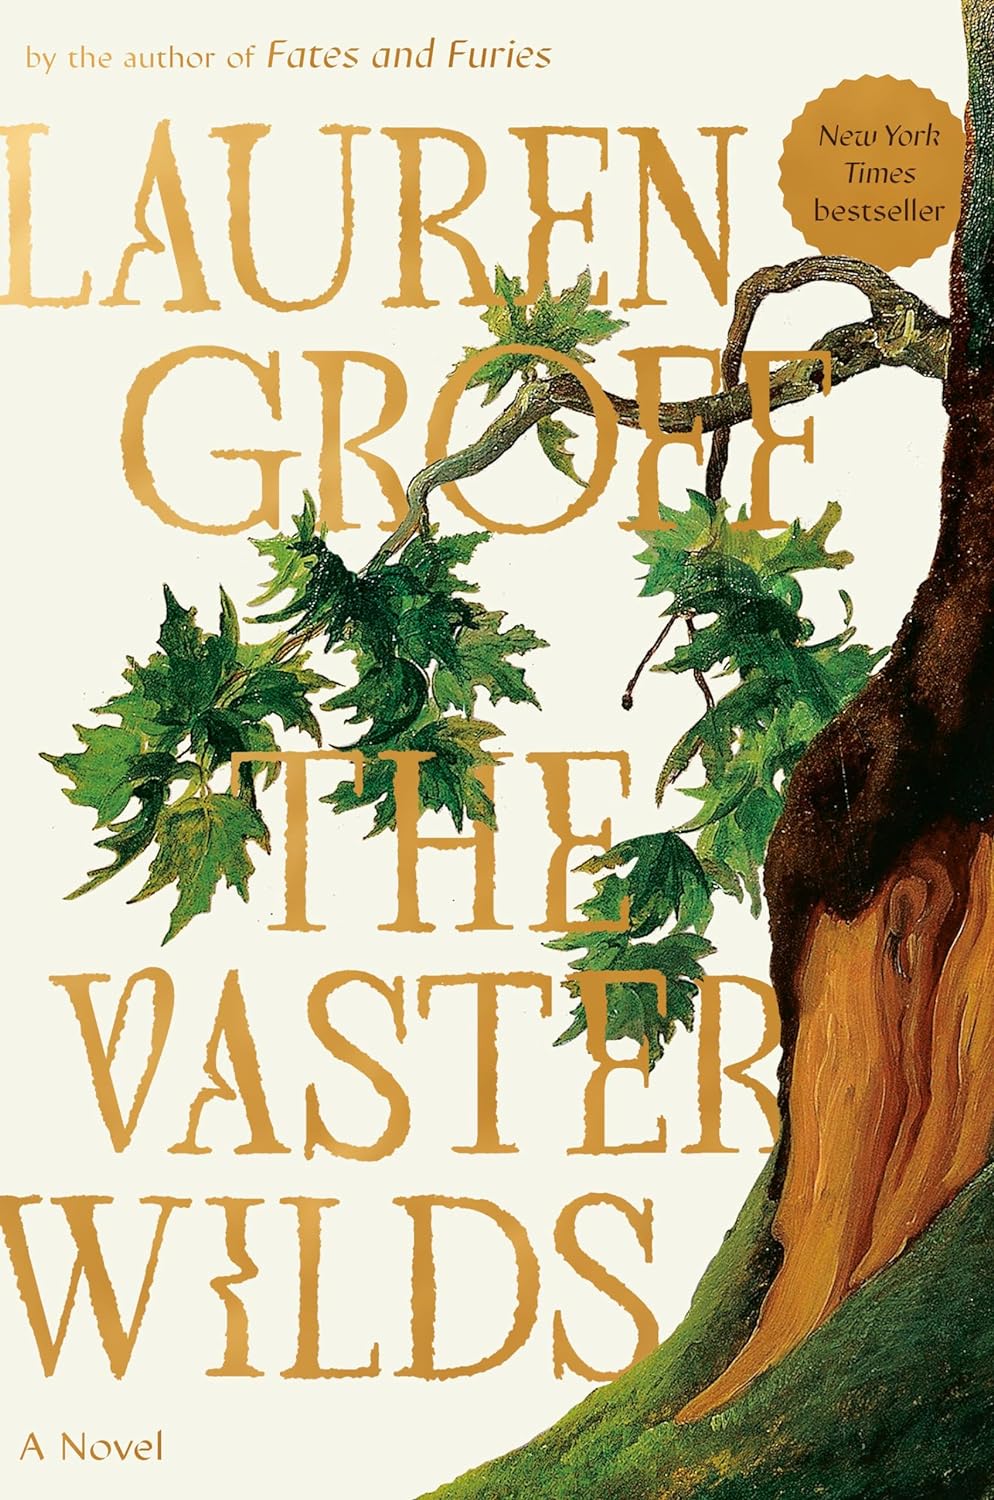 Image of Book cover featuring a partial image of a tree with a low branch.